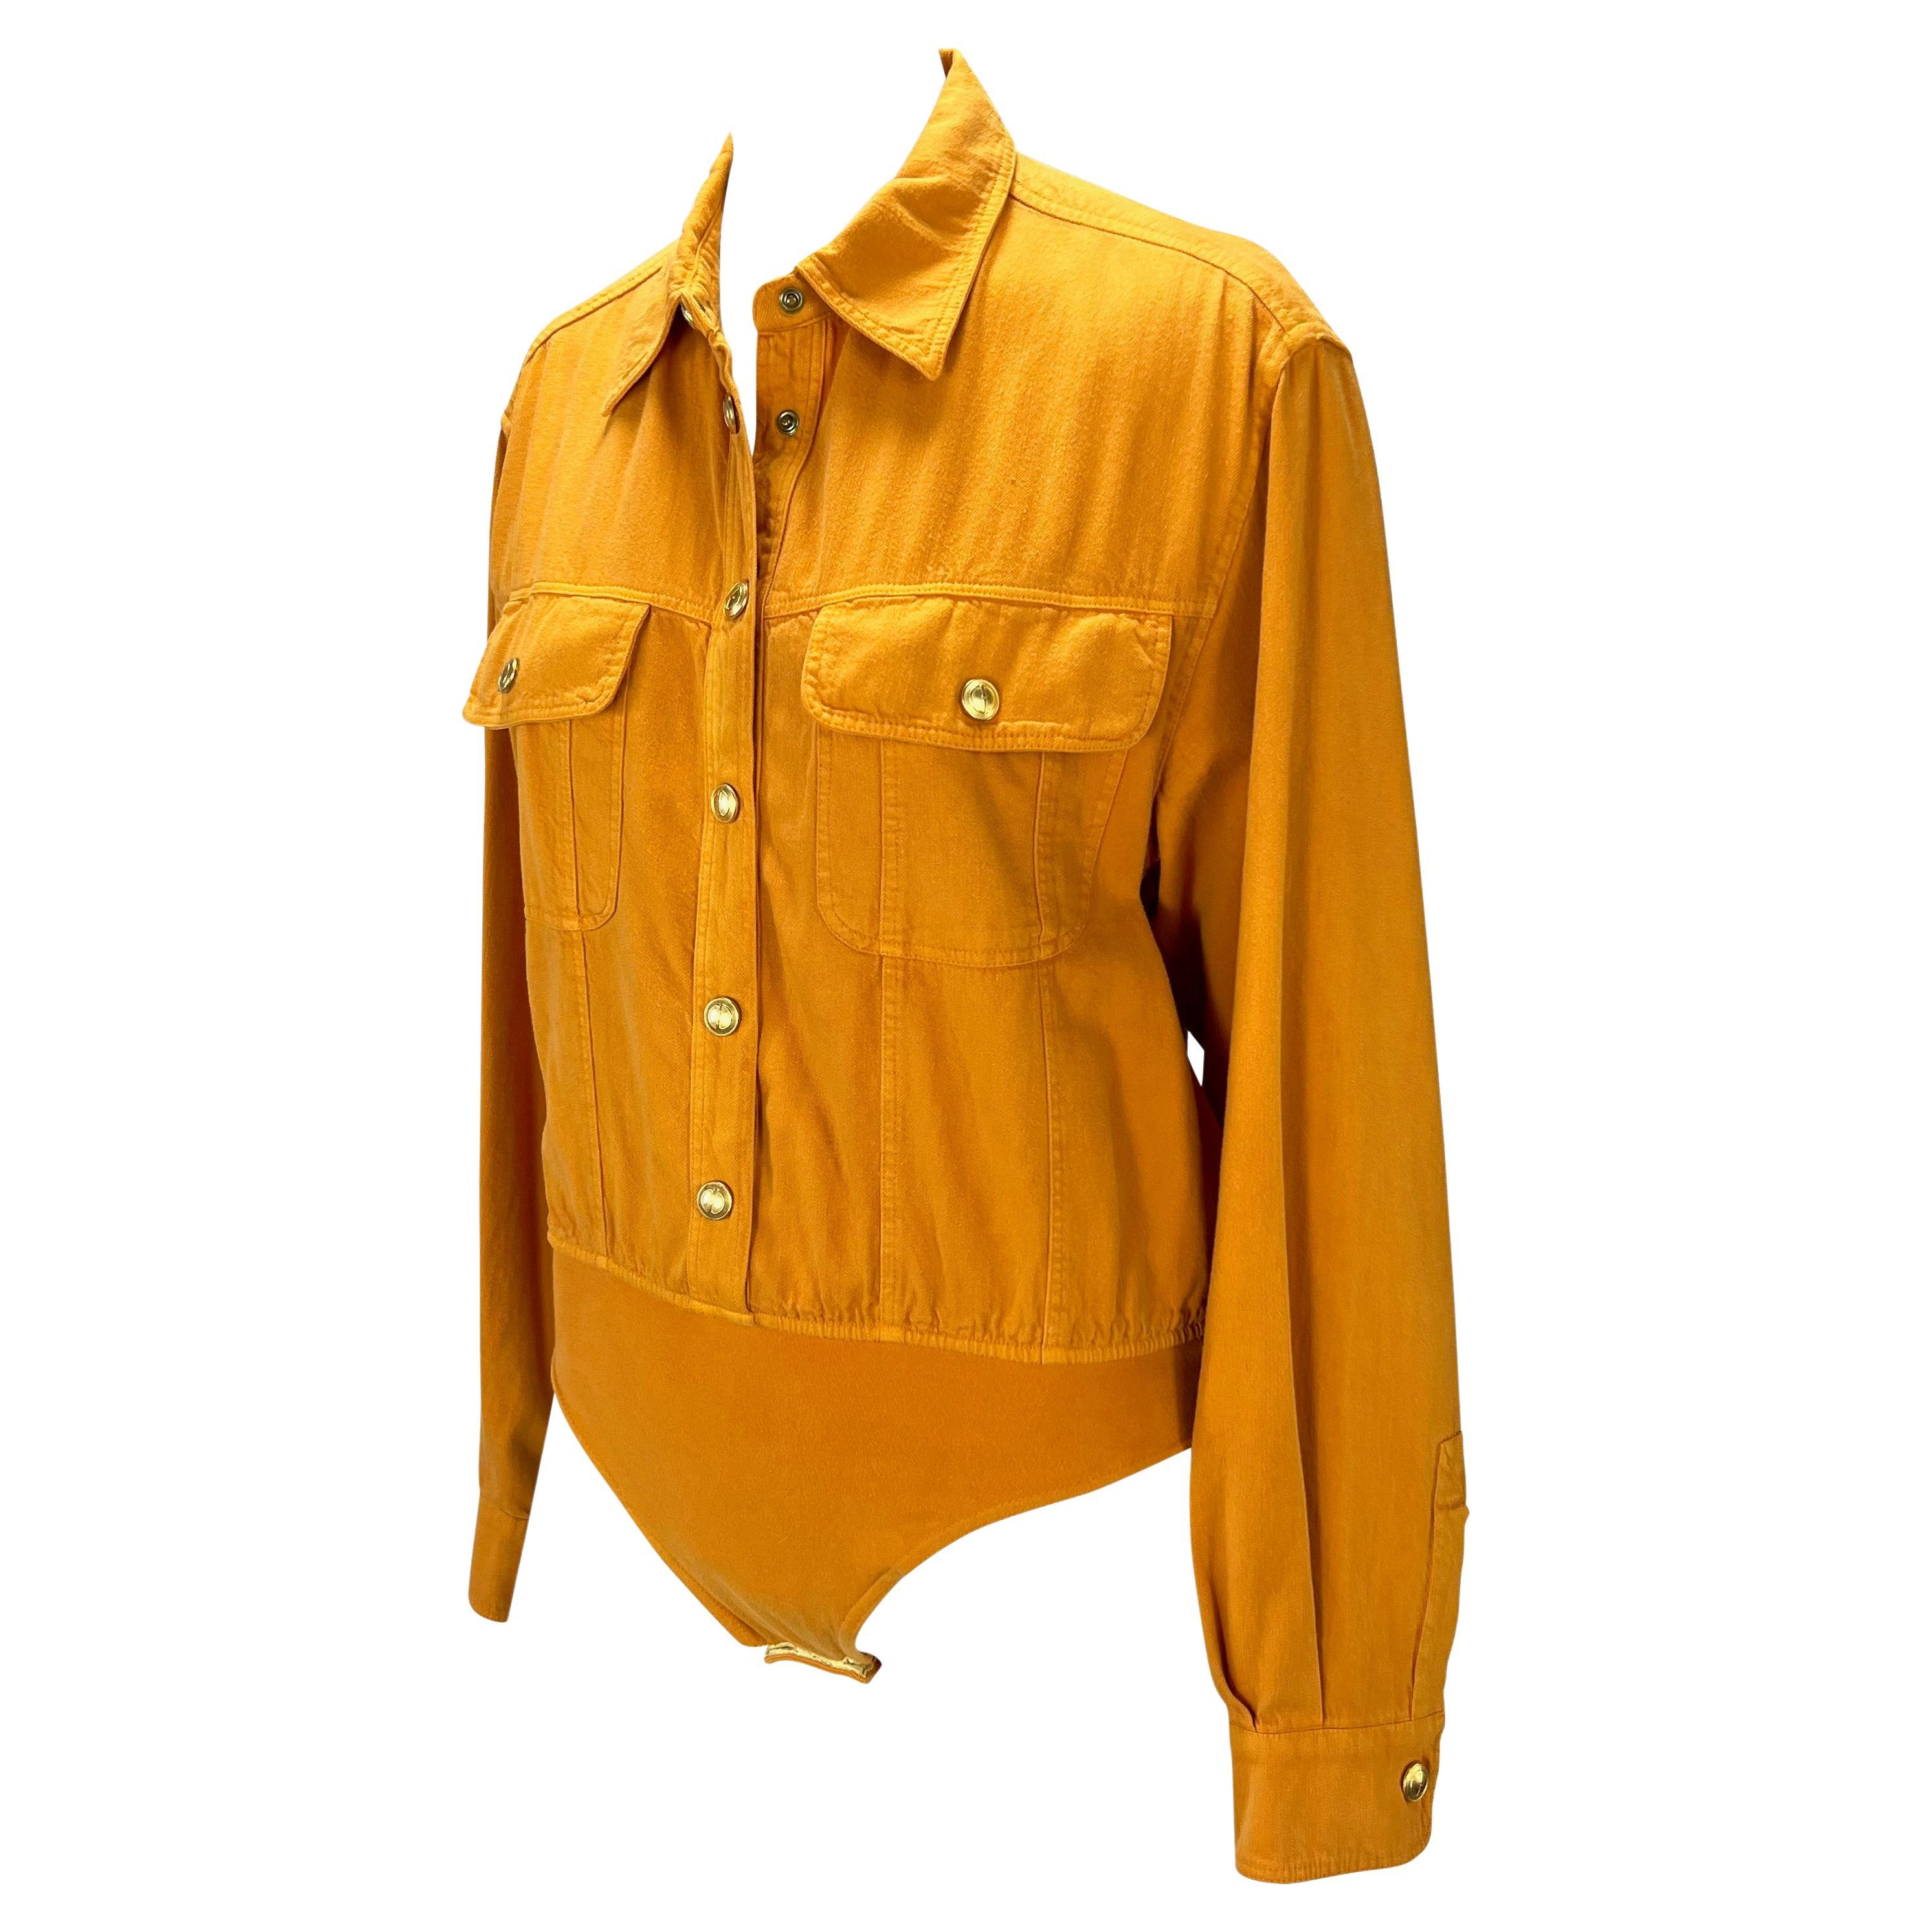 Presenting a vibrant orange Gucci leotard top. From the Spring/Summer 1993 collection, this top features a classic button-down shirt style elevated with two pockets at the bust and gold 'GG' button snap closures throughout. The top features a